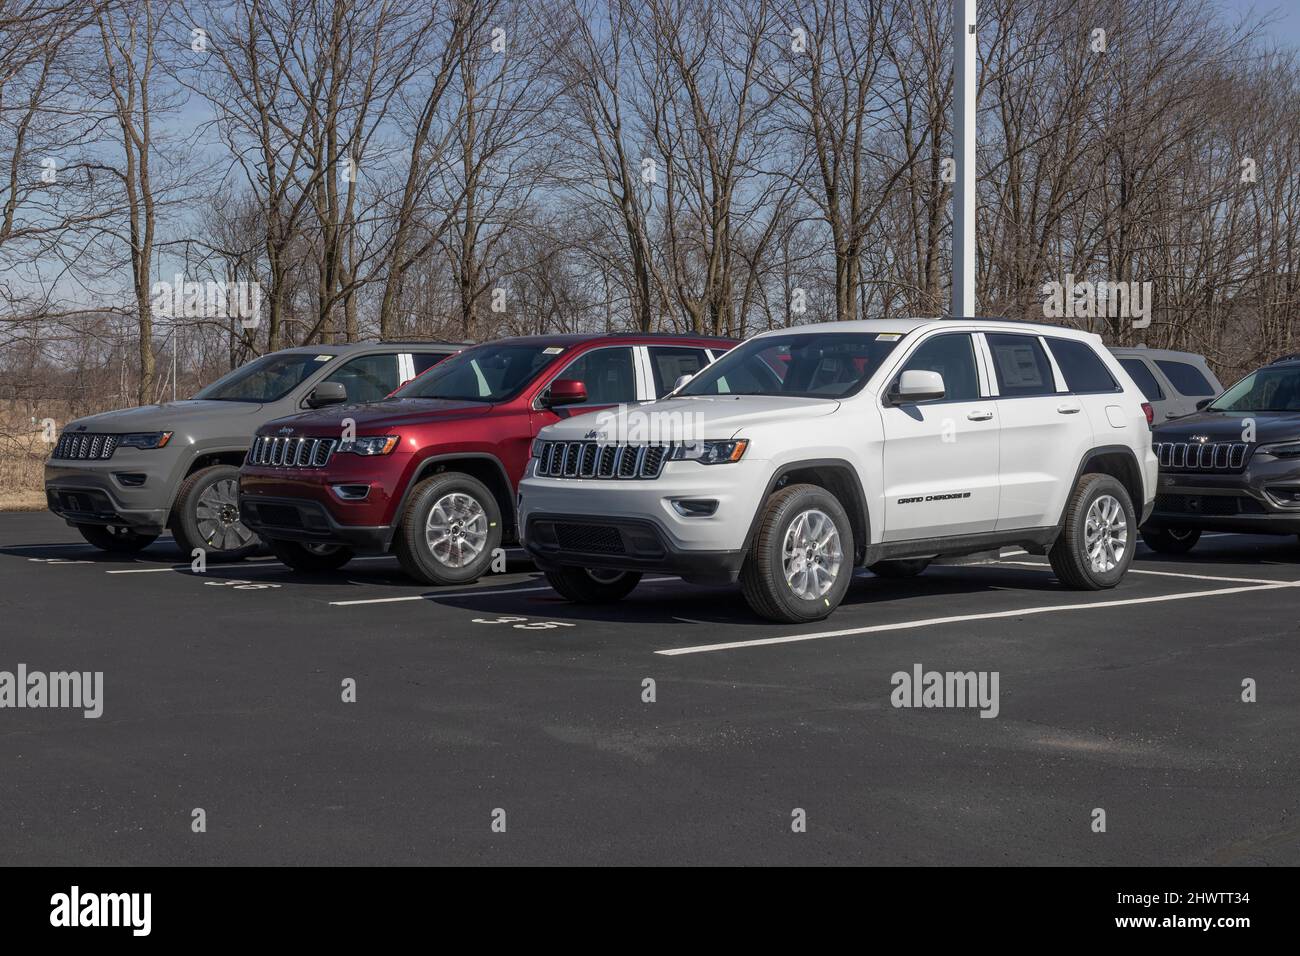 Kokomo - Circa March 2022: Jeep Grand Cherokee display at a Stellantis dealership. Jeep offers the Grand Cherokee in Laredo, Limited, Trailhawk and Ov Stock Photo